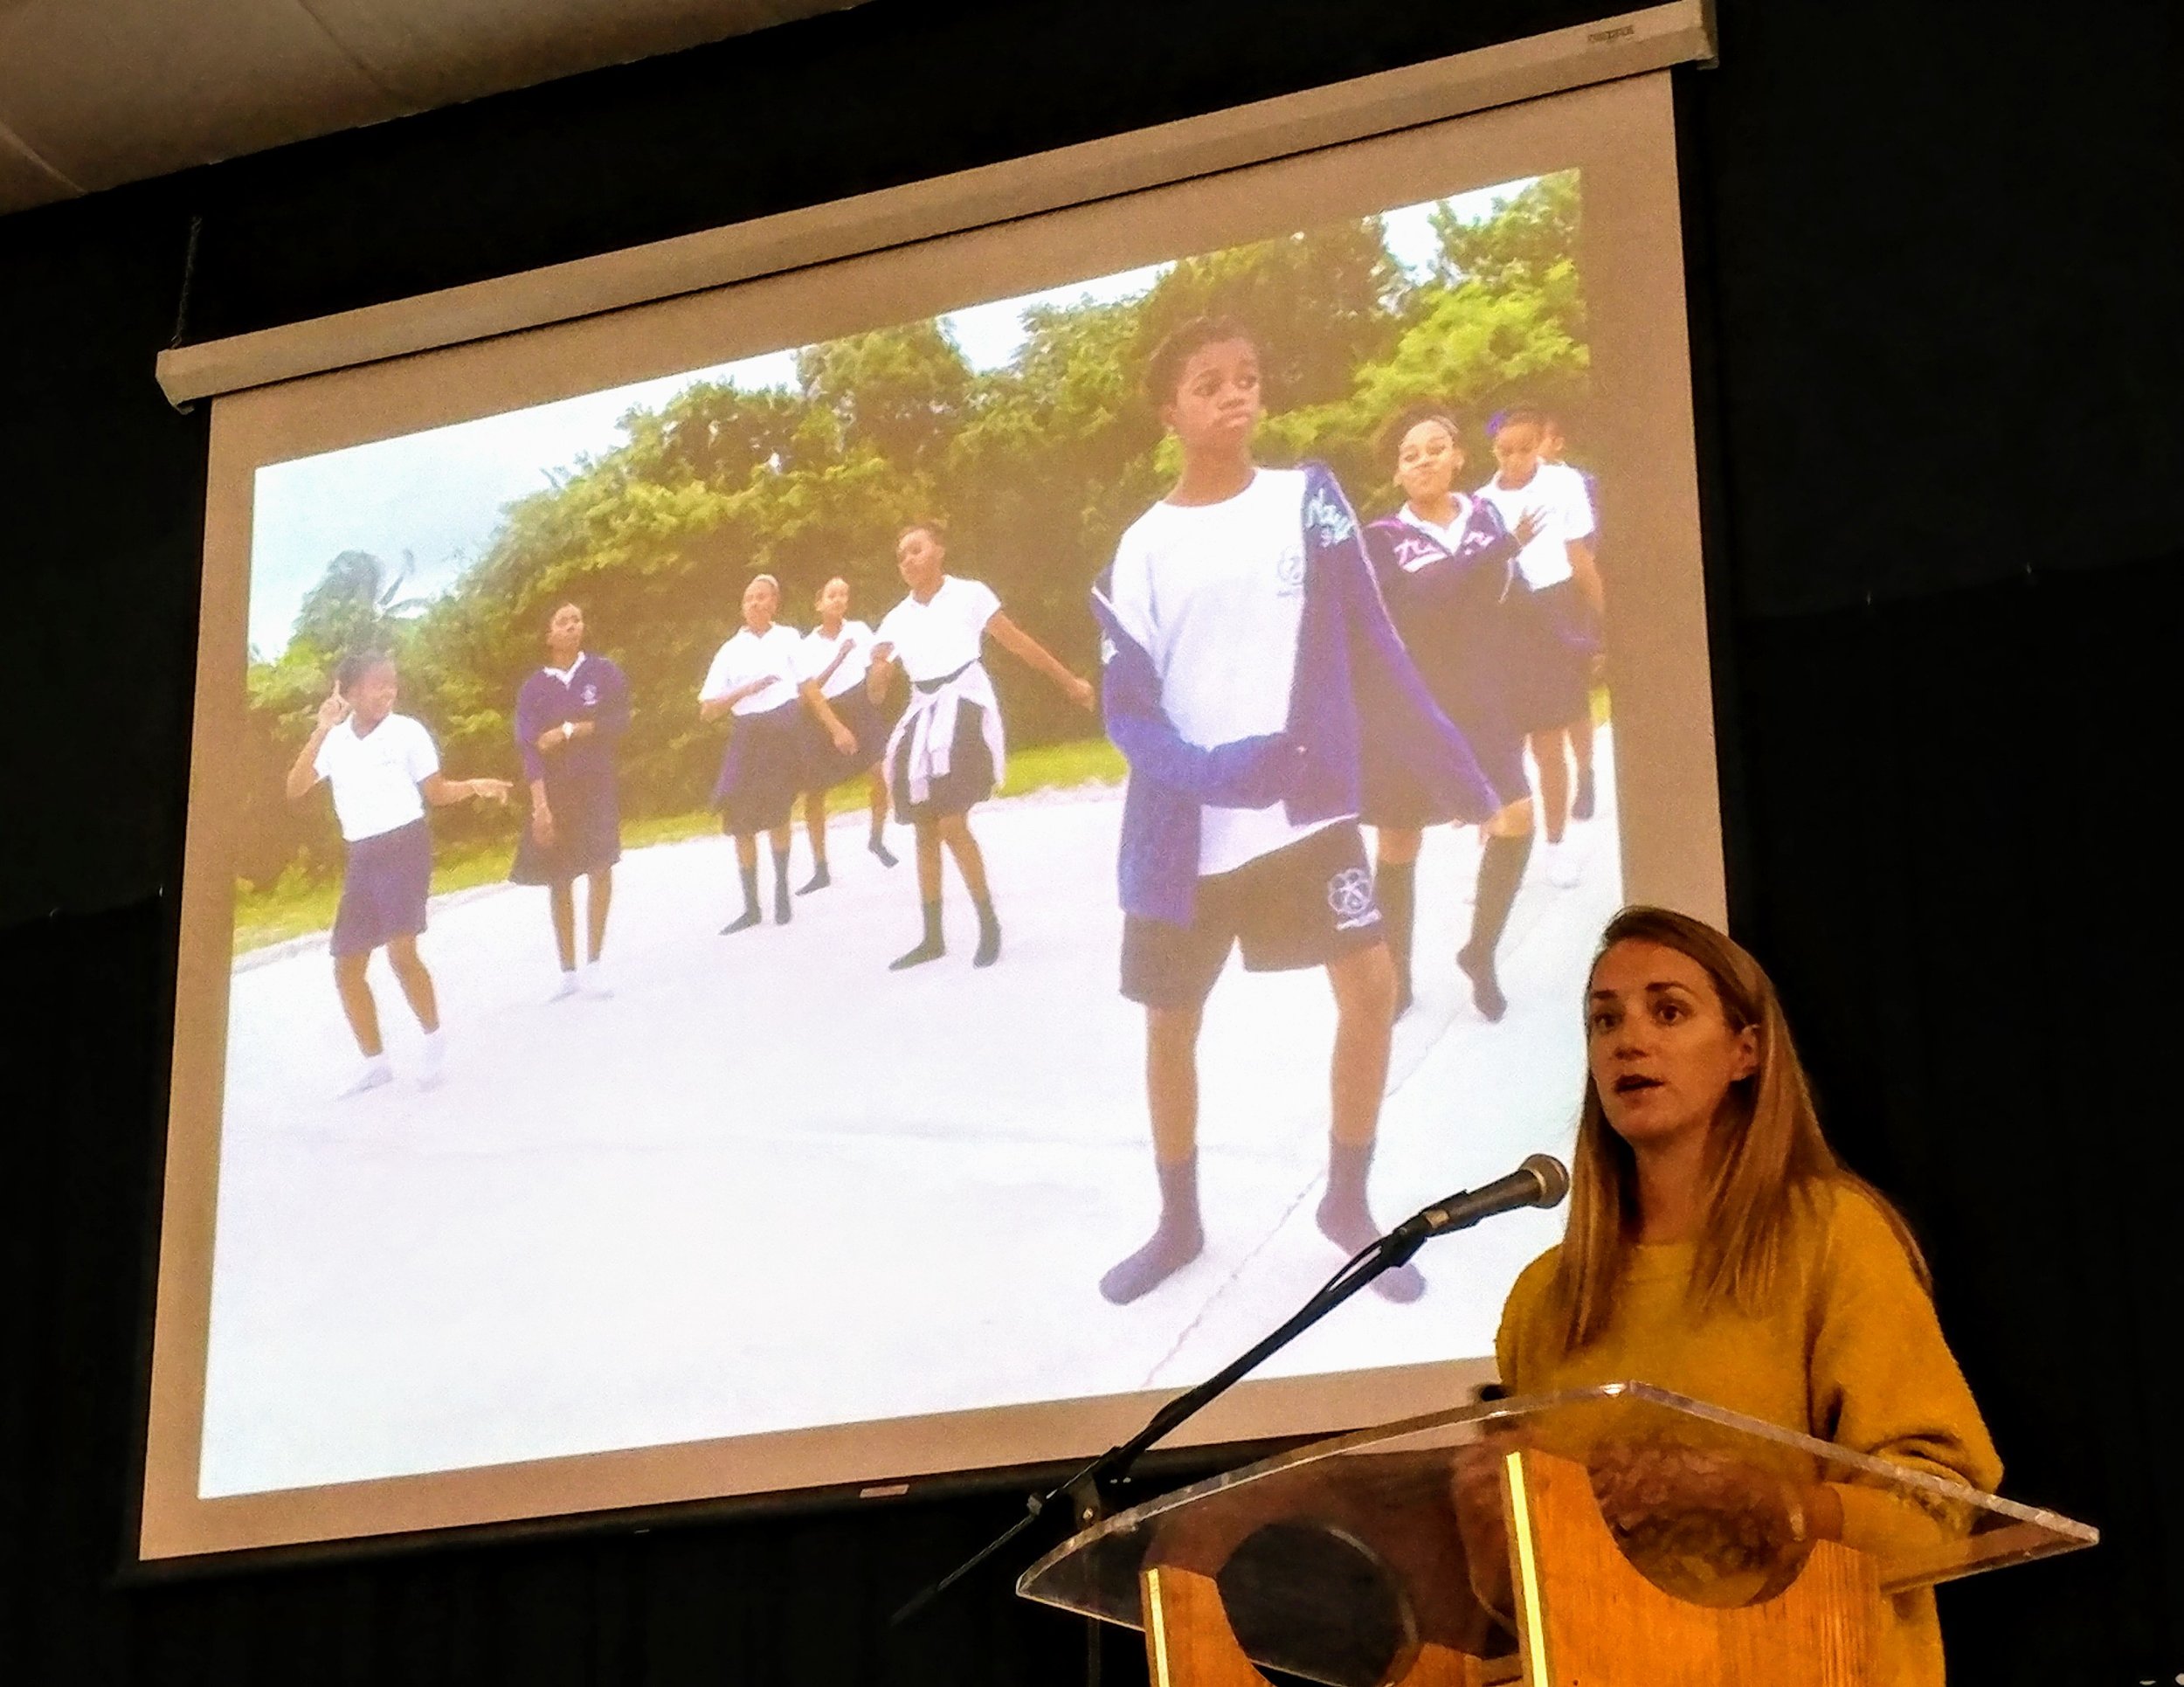 Candice Brittain presenting the parrotfish research, and showing an image of Deep Creek Middle School students preparing a skit to perform in their communities conveying the importance of parrotfish to the marine ecosystem.